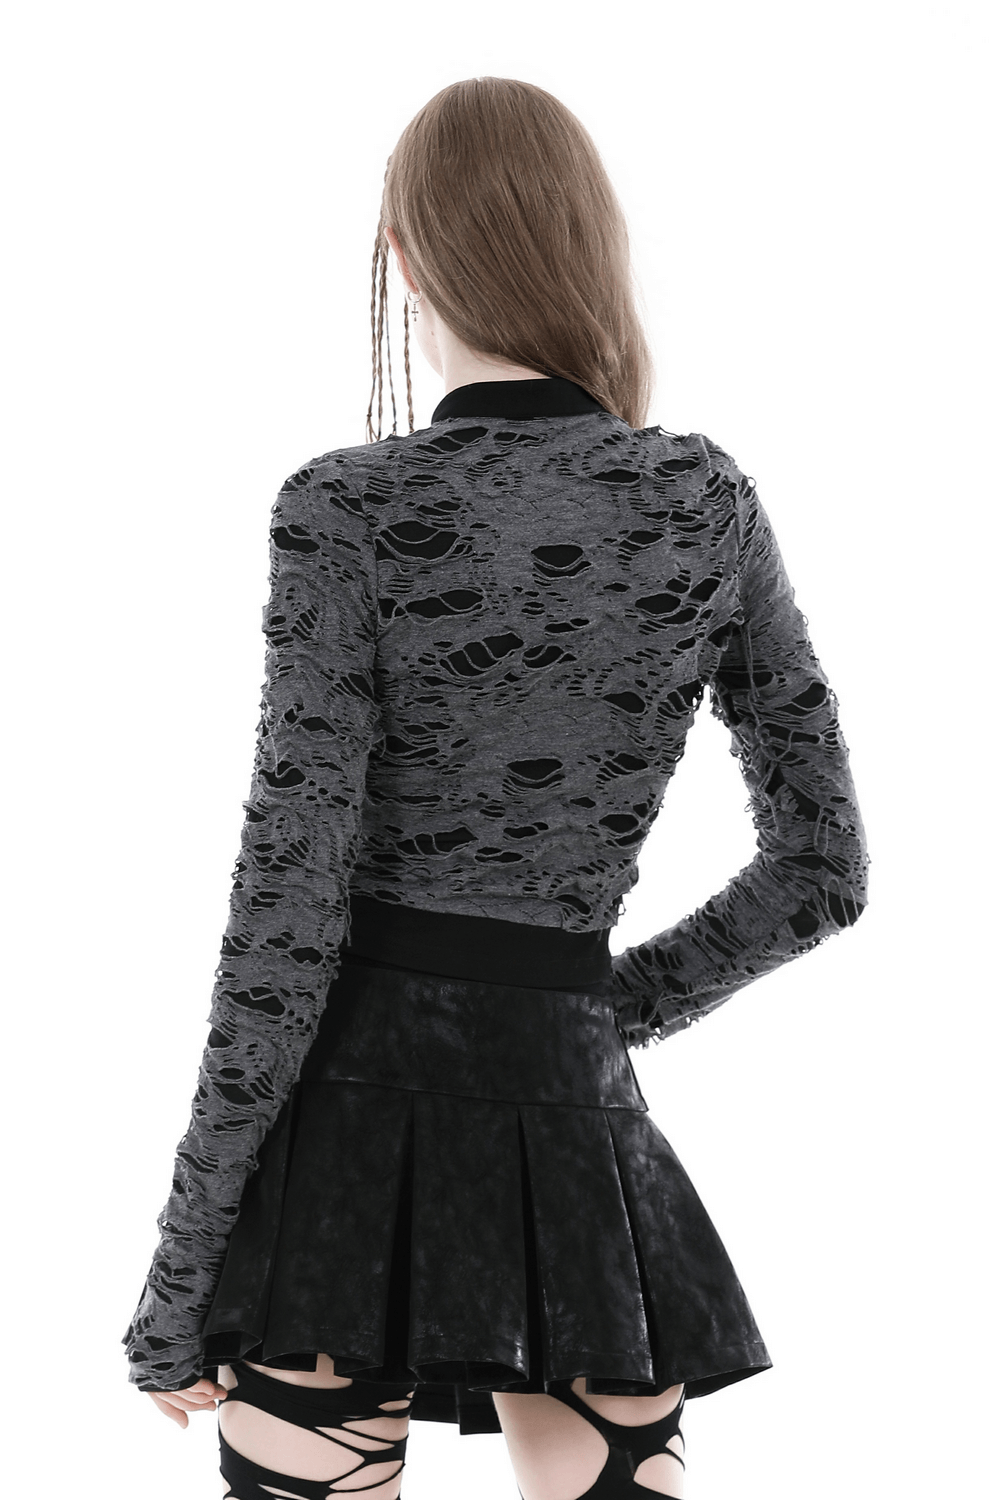 Ripped Mesh Long Sleeved Top with Metal Eyelets